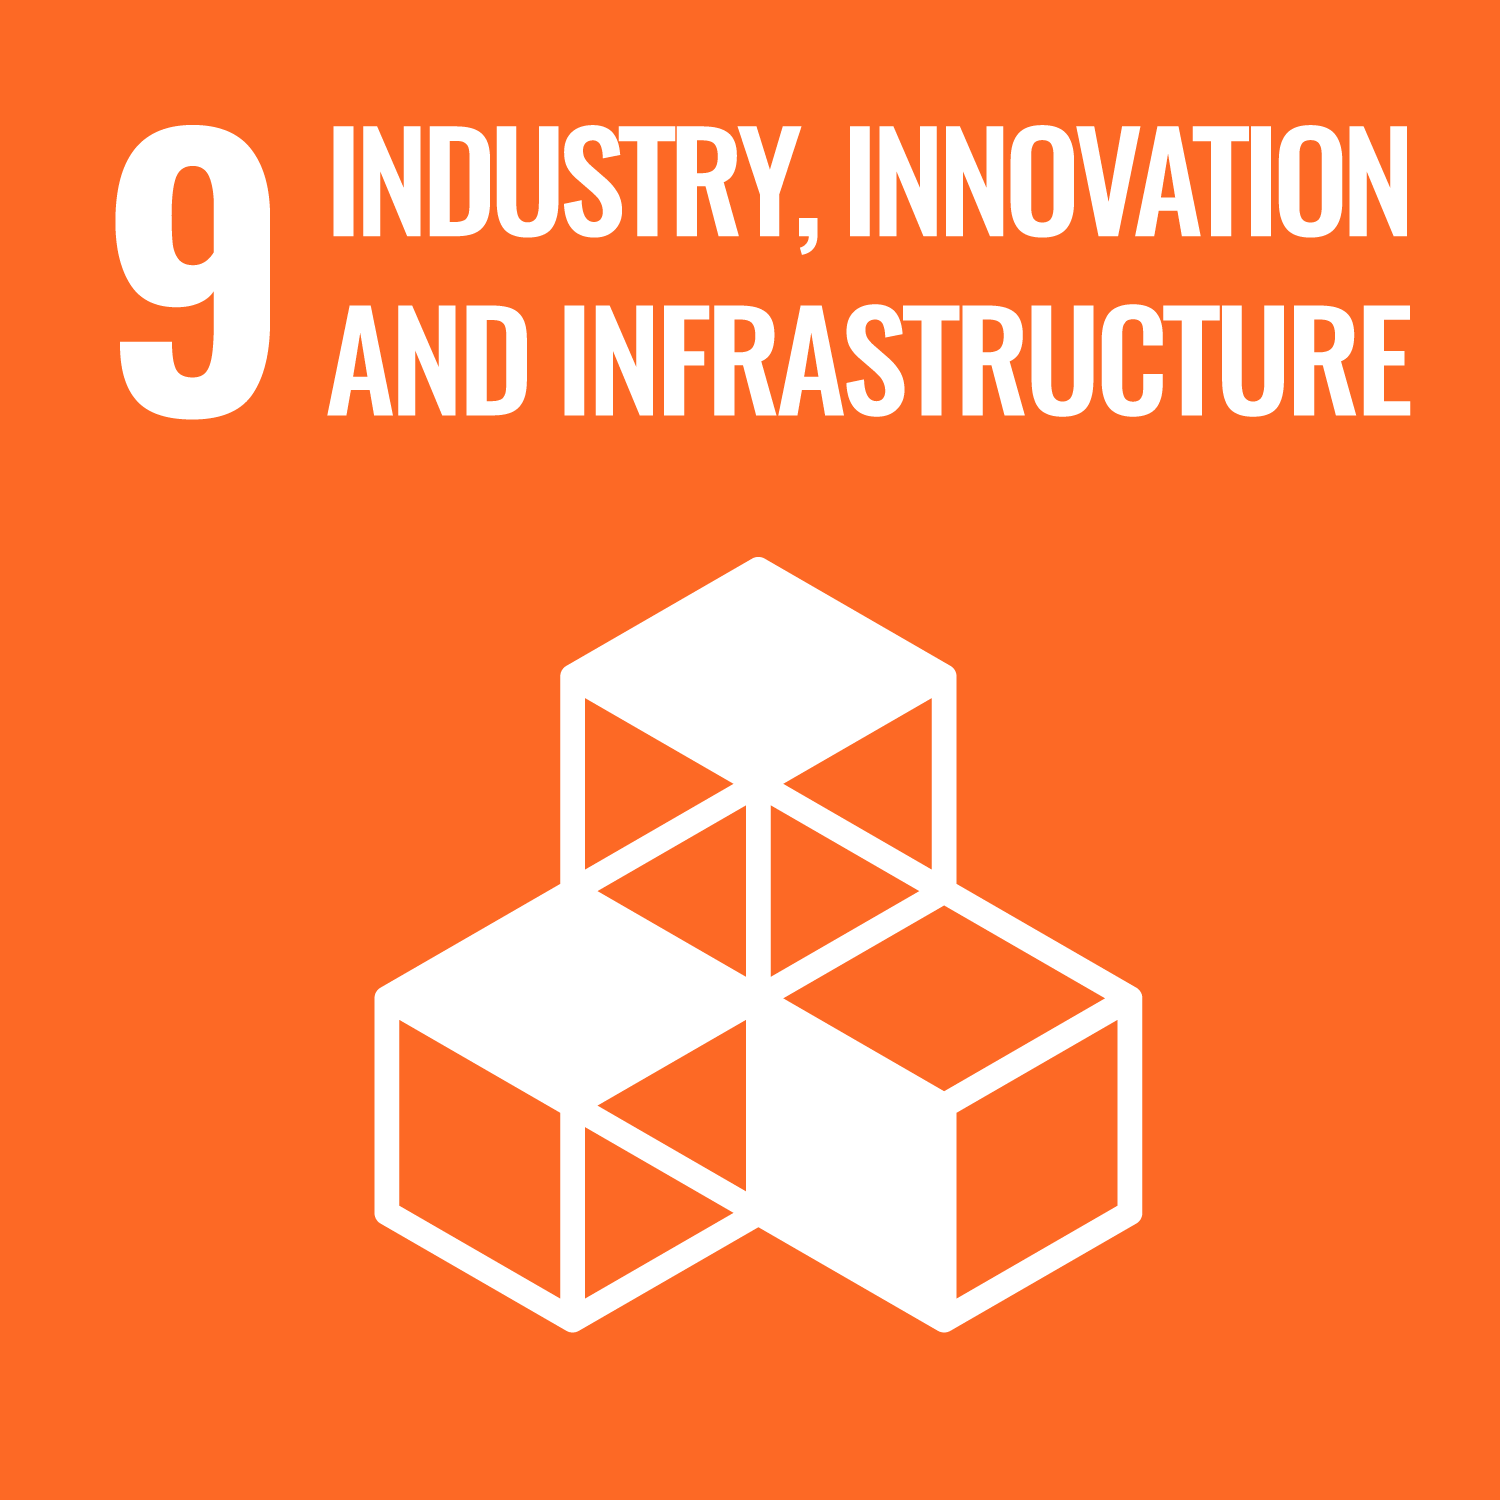 UN Sustainable goal - Industry, Innovation and Infrastructure